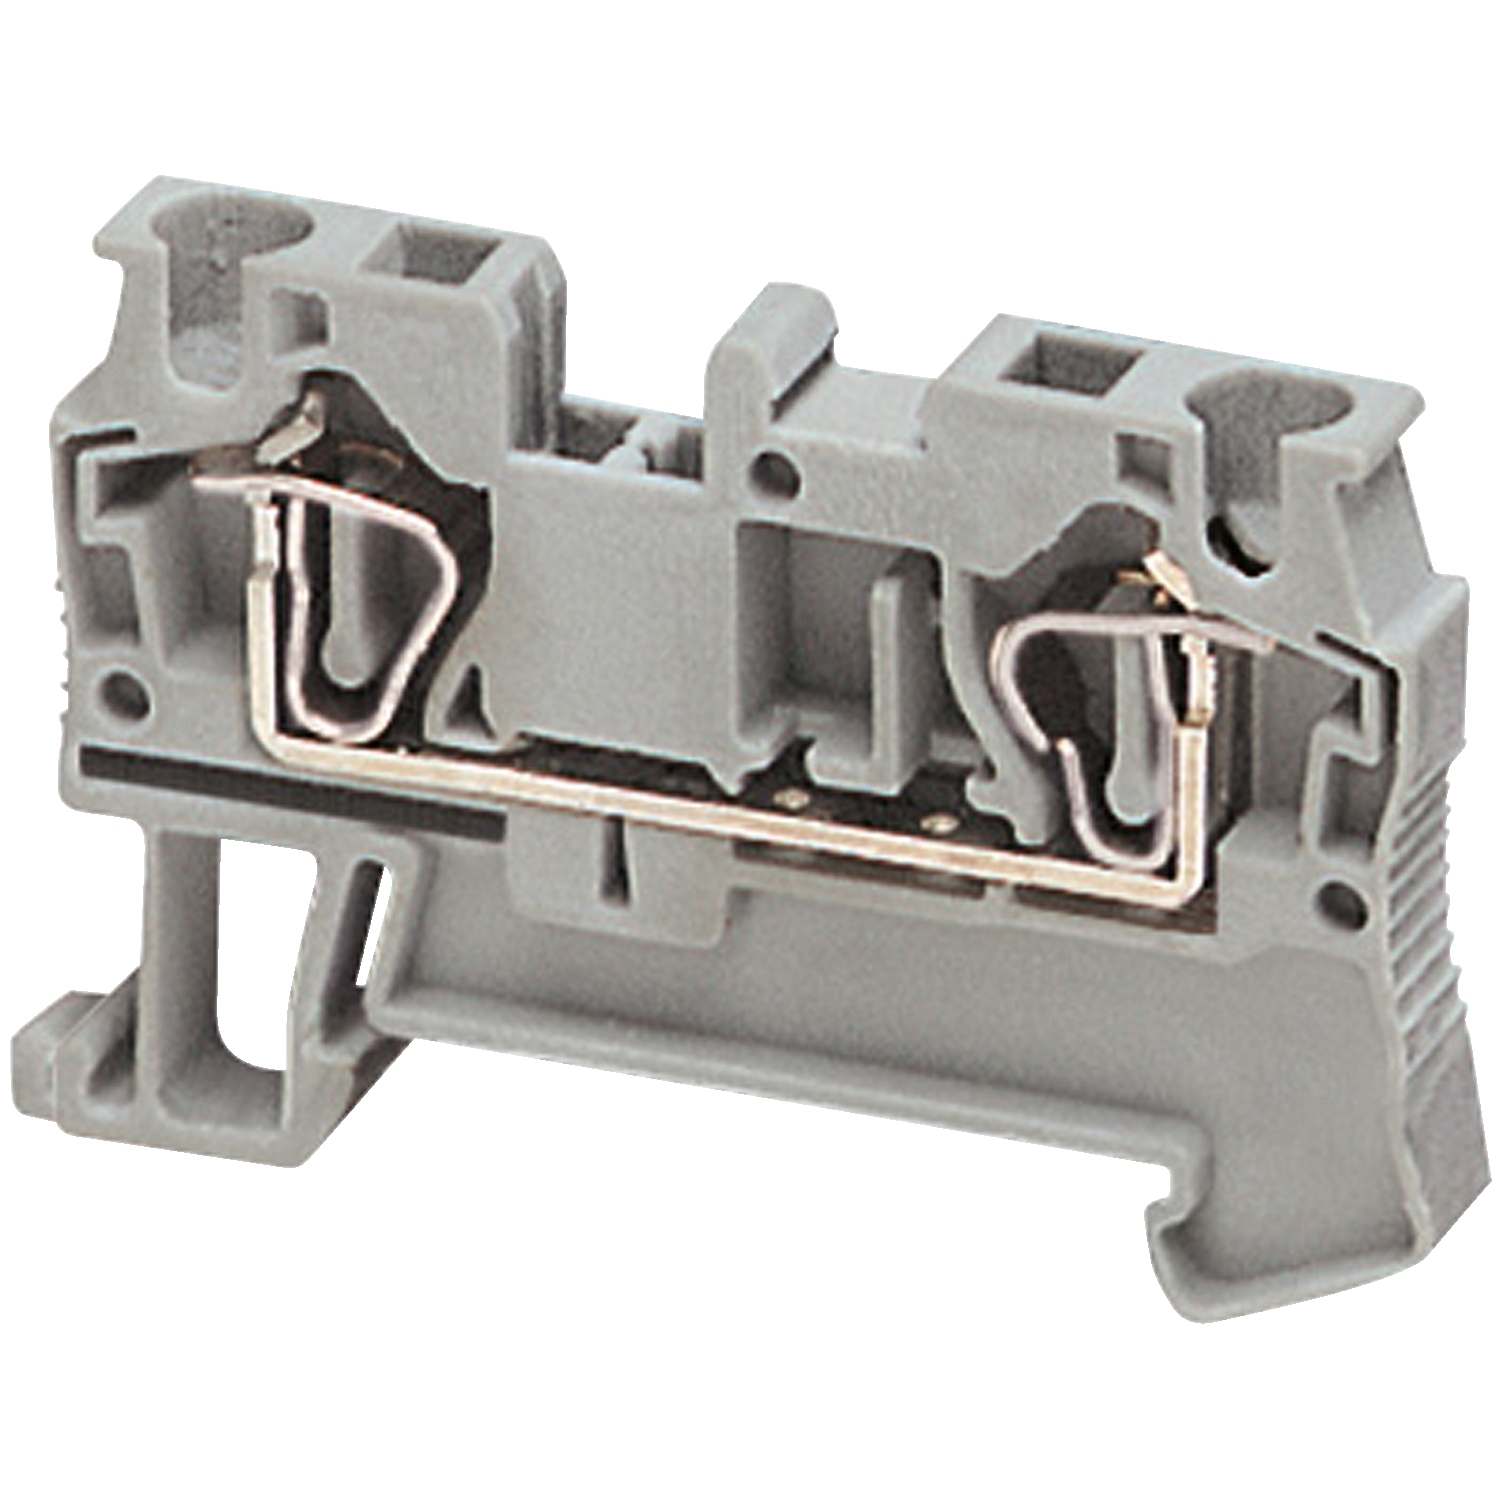 Terminal block, Linergy TR, spring type, feed through, 2 points, 4mm², grey, set of 50